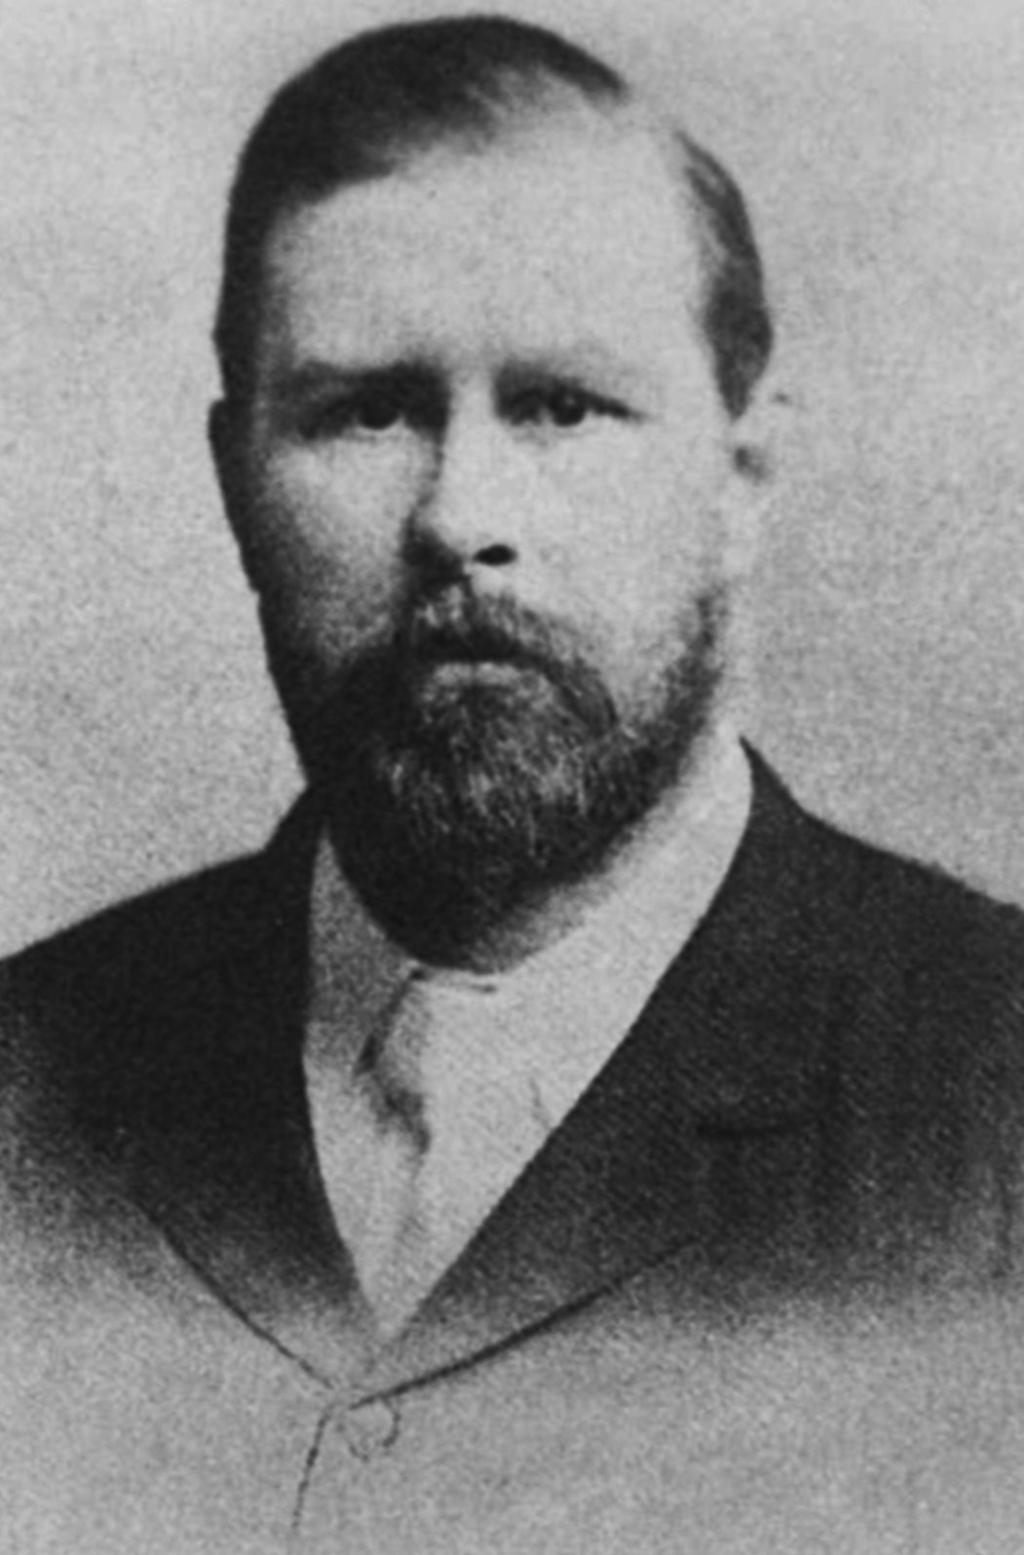 BRAM STOKER THE MAN BEHIND THE MONSTER Bram Stoker always liked scary stories. He was born near Dublin, Ireland on November 8, 1847, but was sick during most of his childhood.